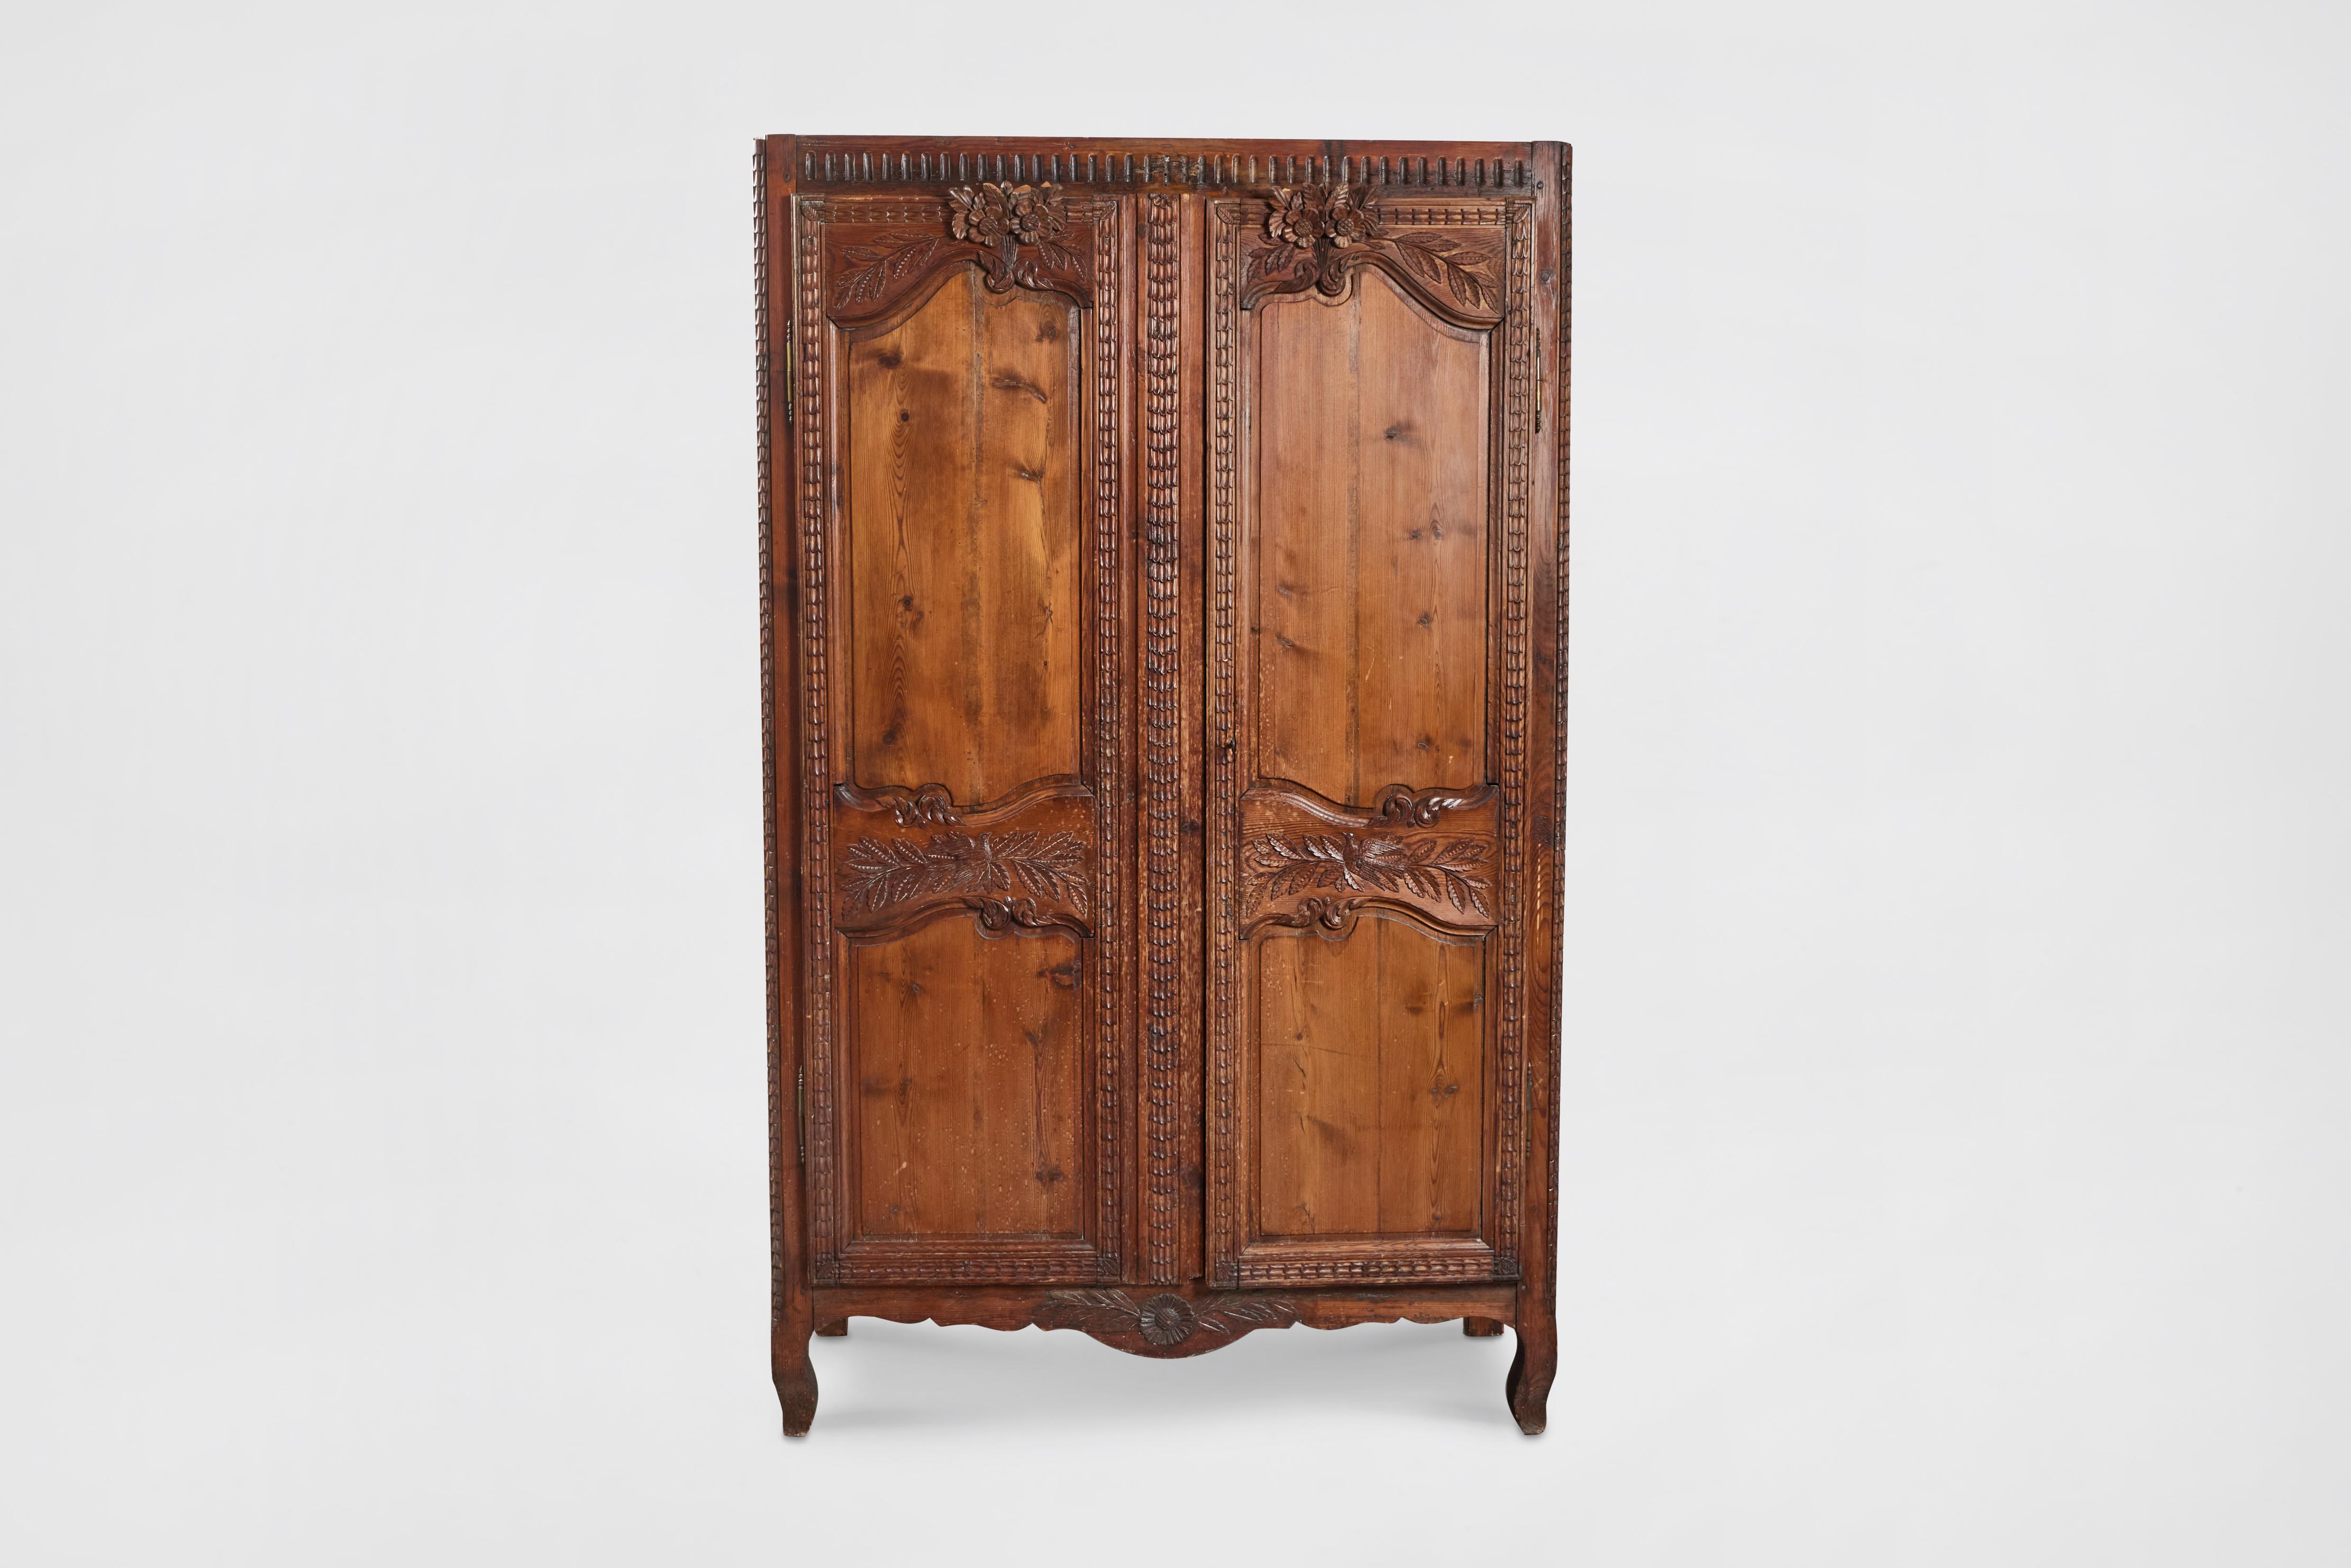 19th Century antique French provincial carved oak armoire, with flora and fauna carvings on the doors and intricate border carvings. One interior shelf.
Provenance: Pierre Deux.